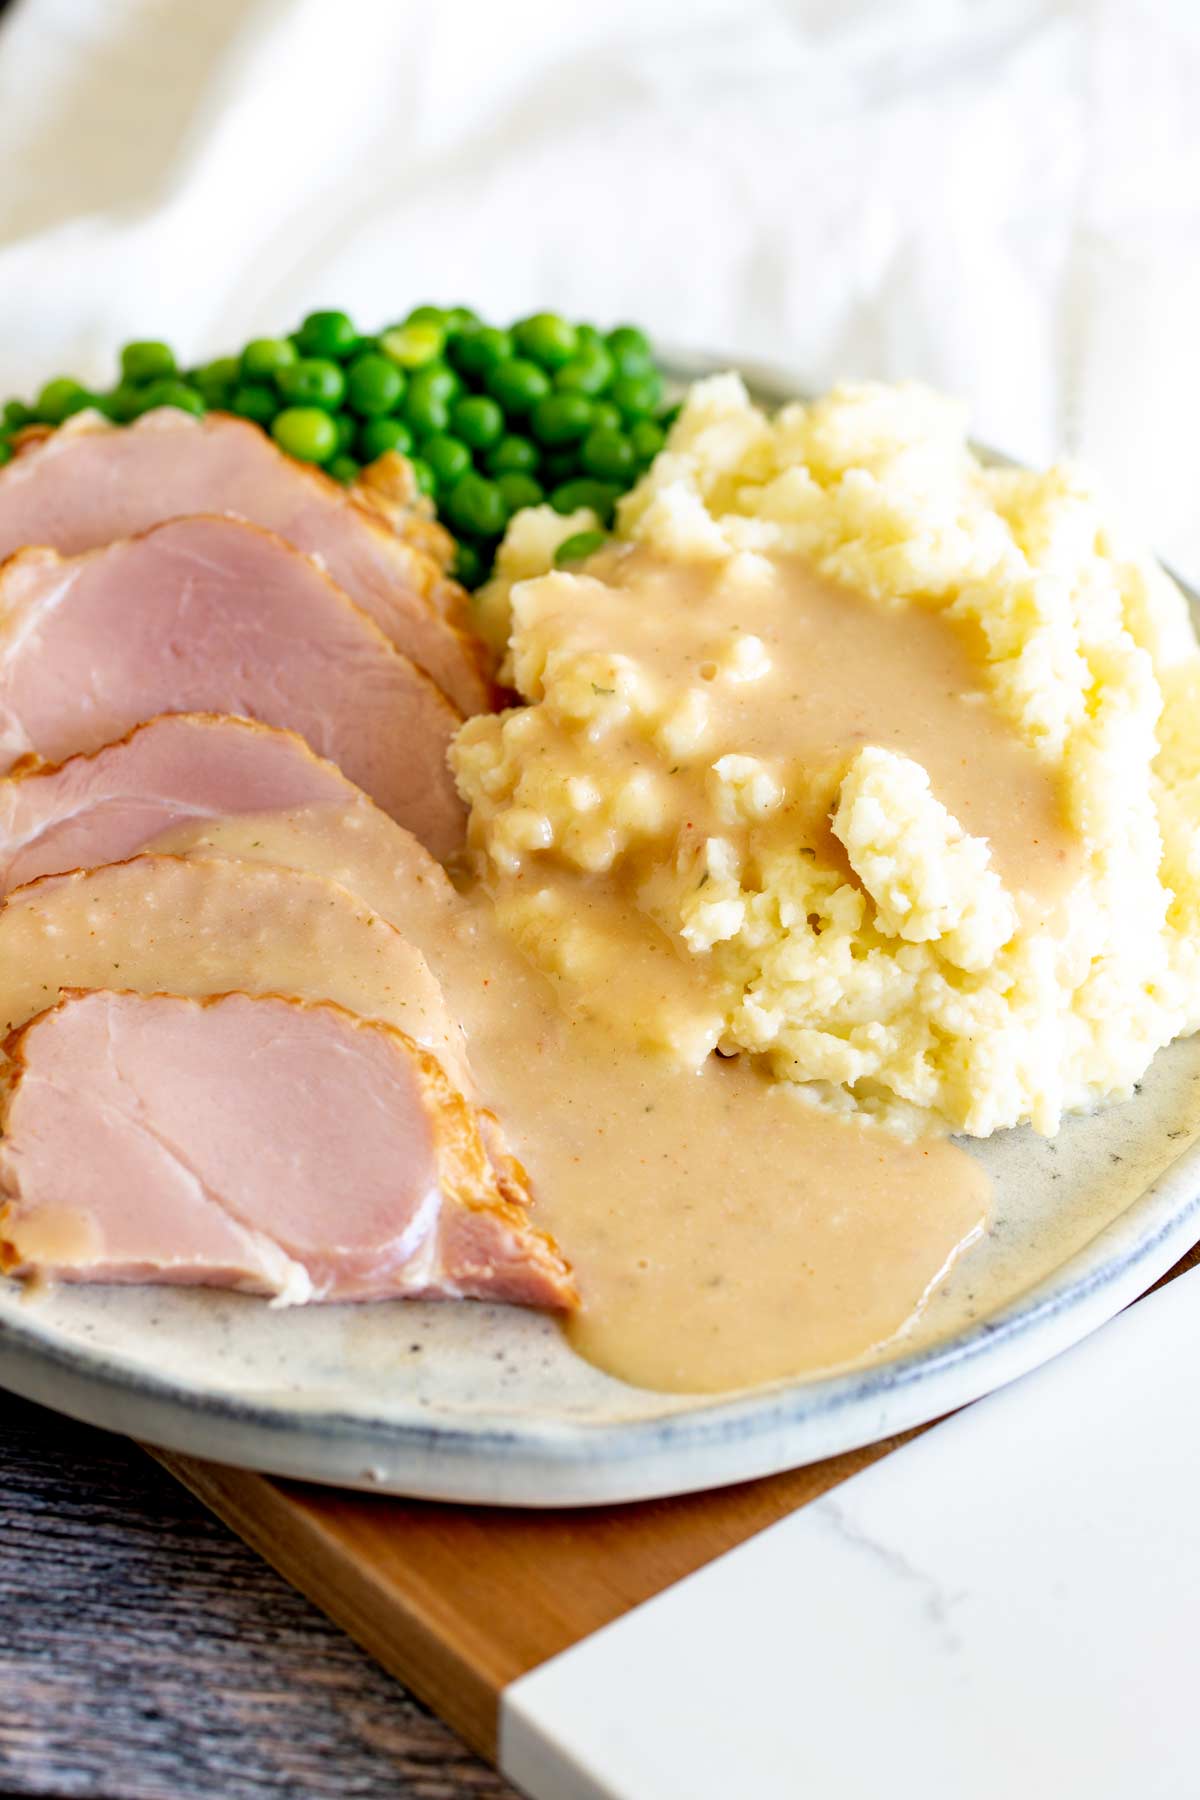 A stone plate with a creamy gravy poured over slices of ham and mashed potato